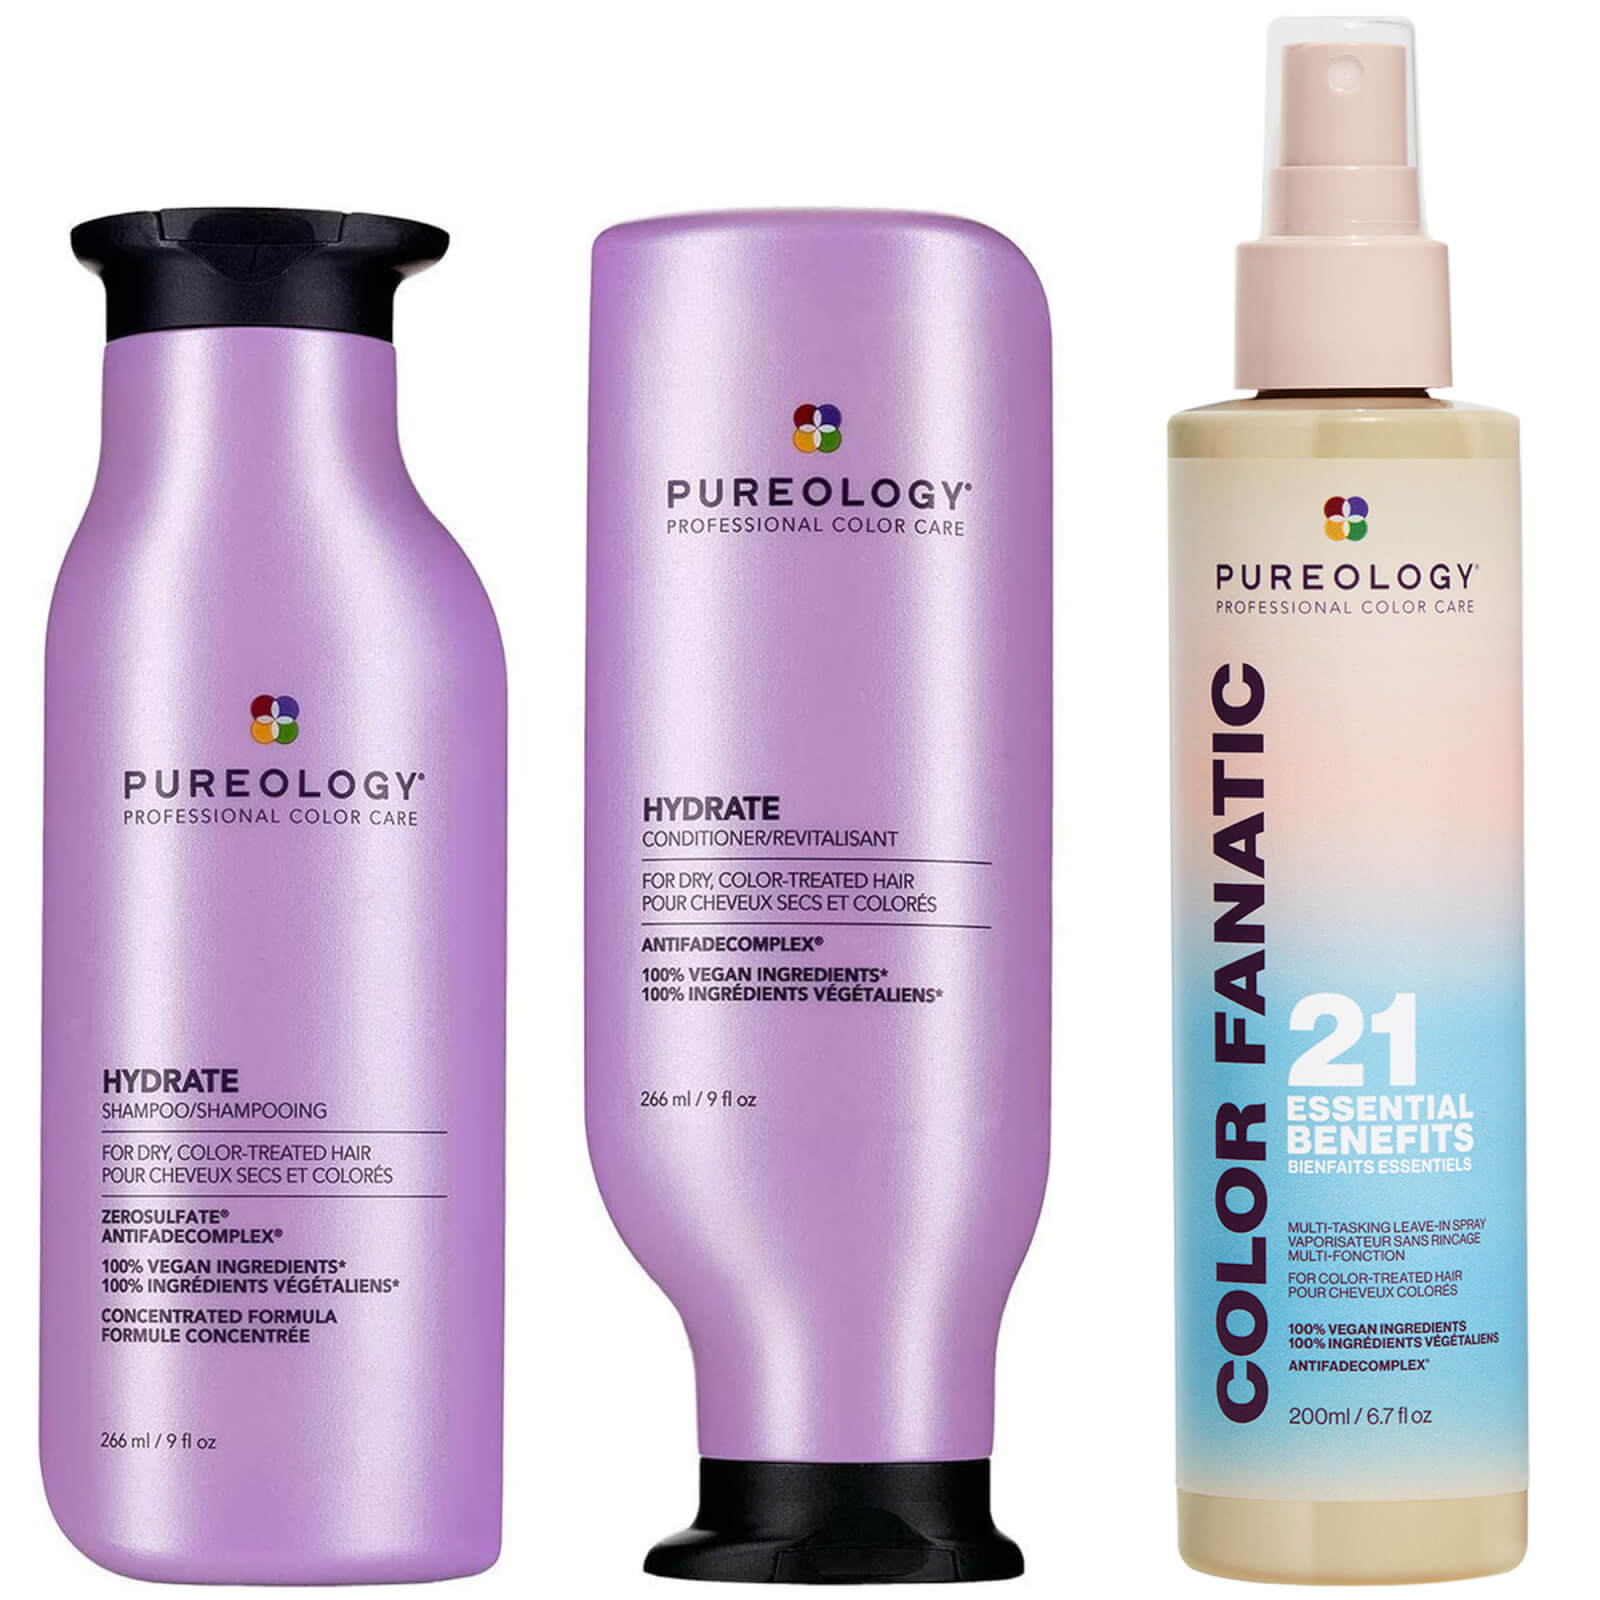 Pureology Hydrate and Colour Fanatic Trio (Worth $161.00) 